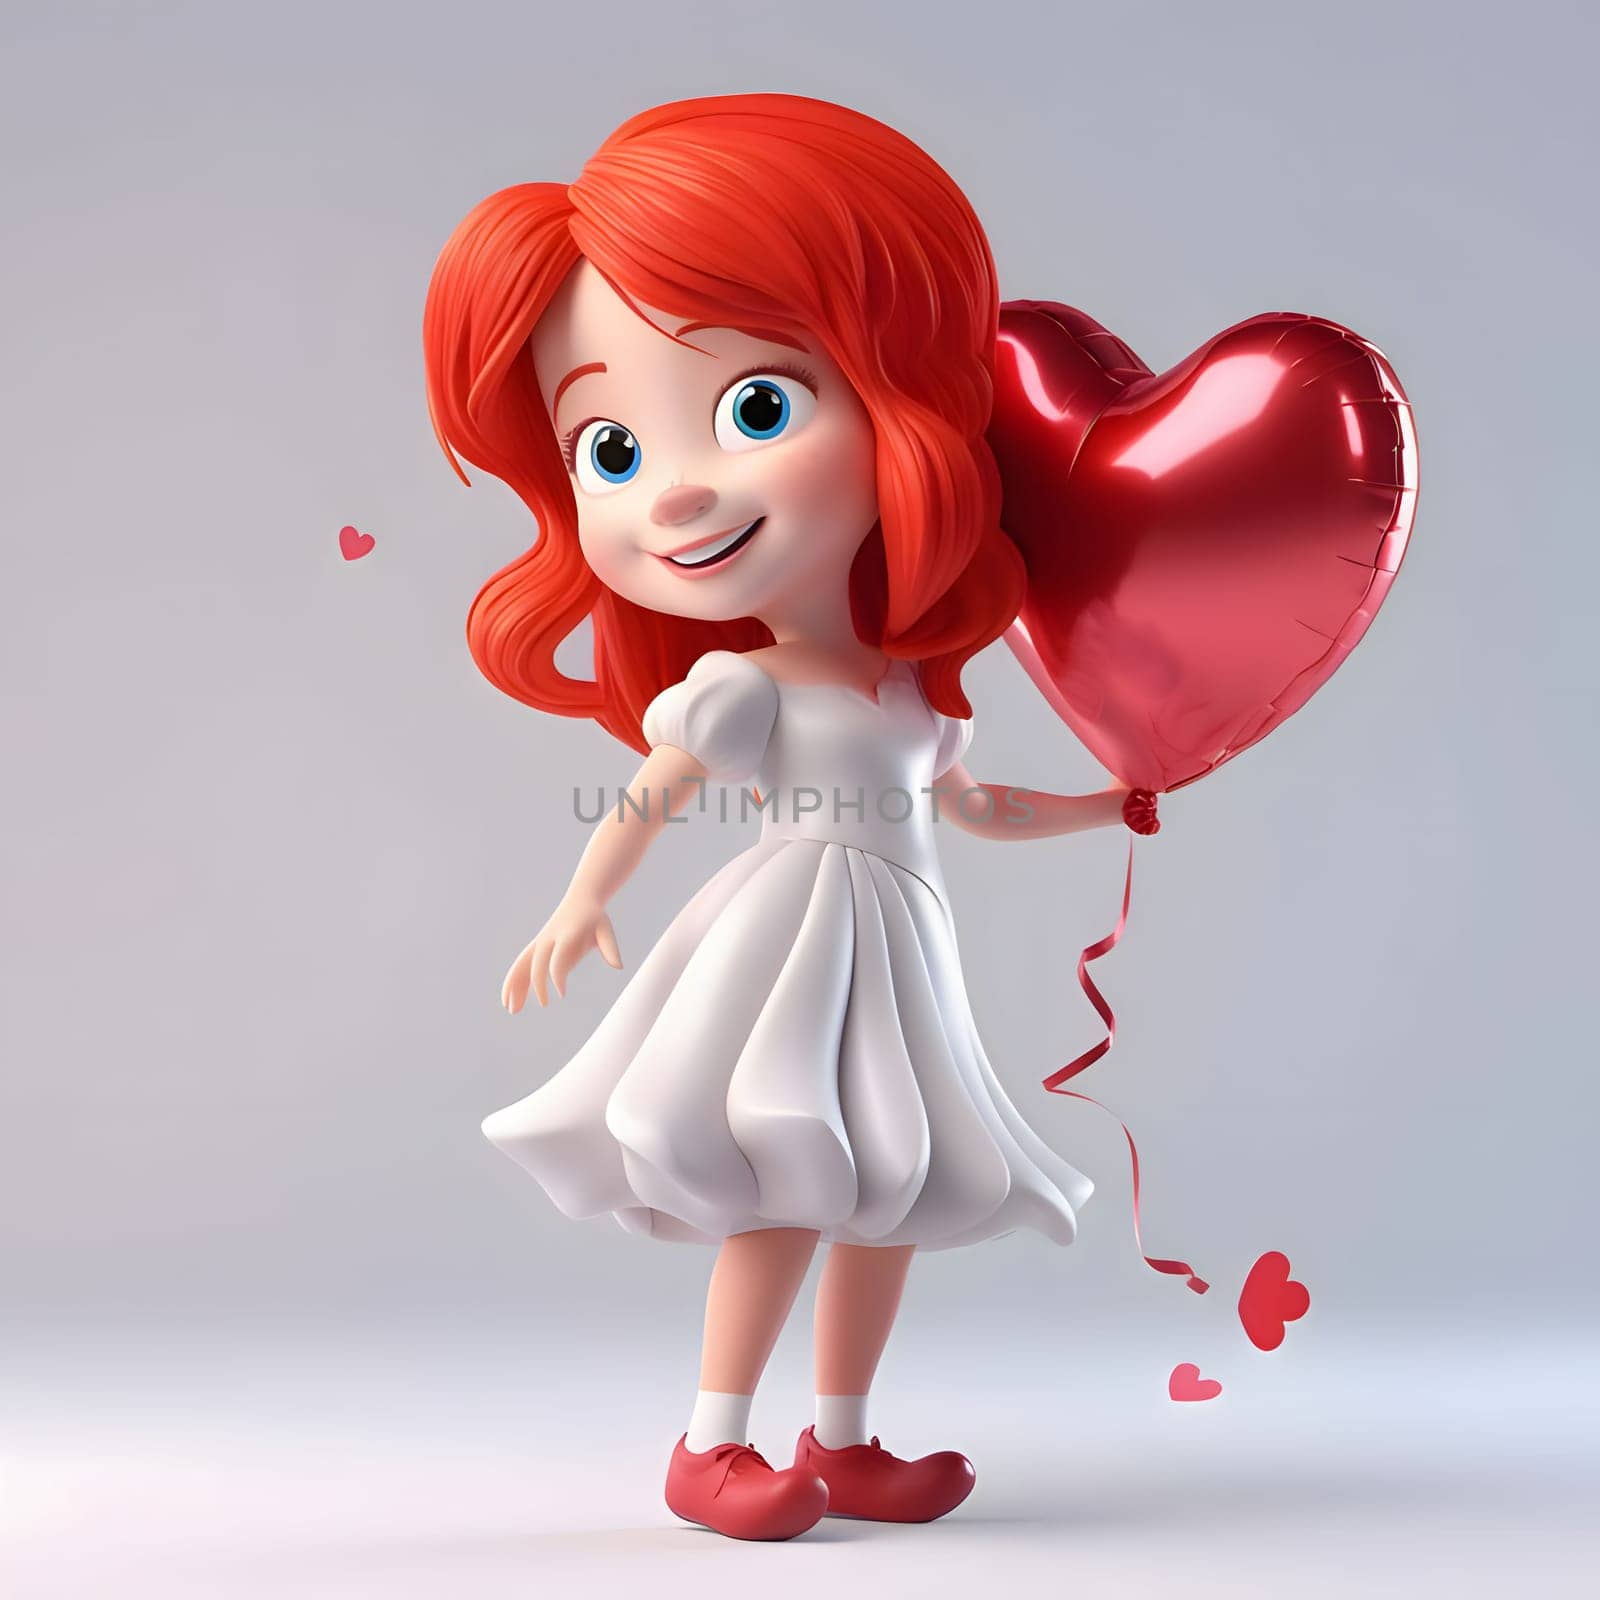 Illustration of a little girl or having a red balloon in the shape of a heart. Heart as a symbol of affection and love. The time of falling in love and love.